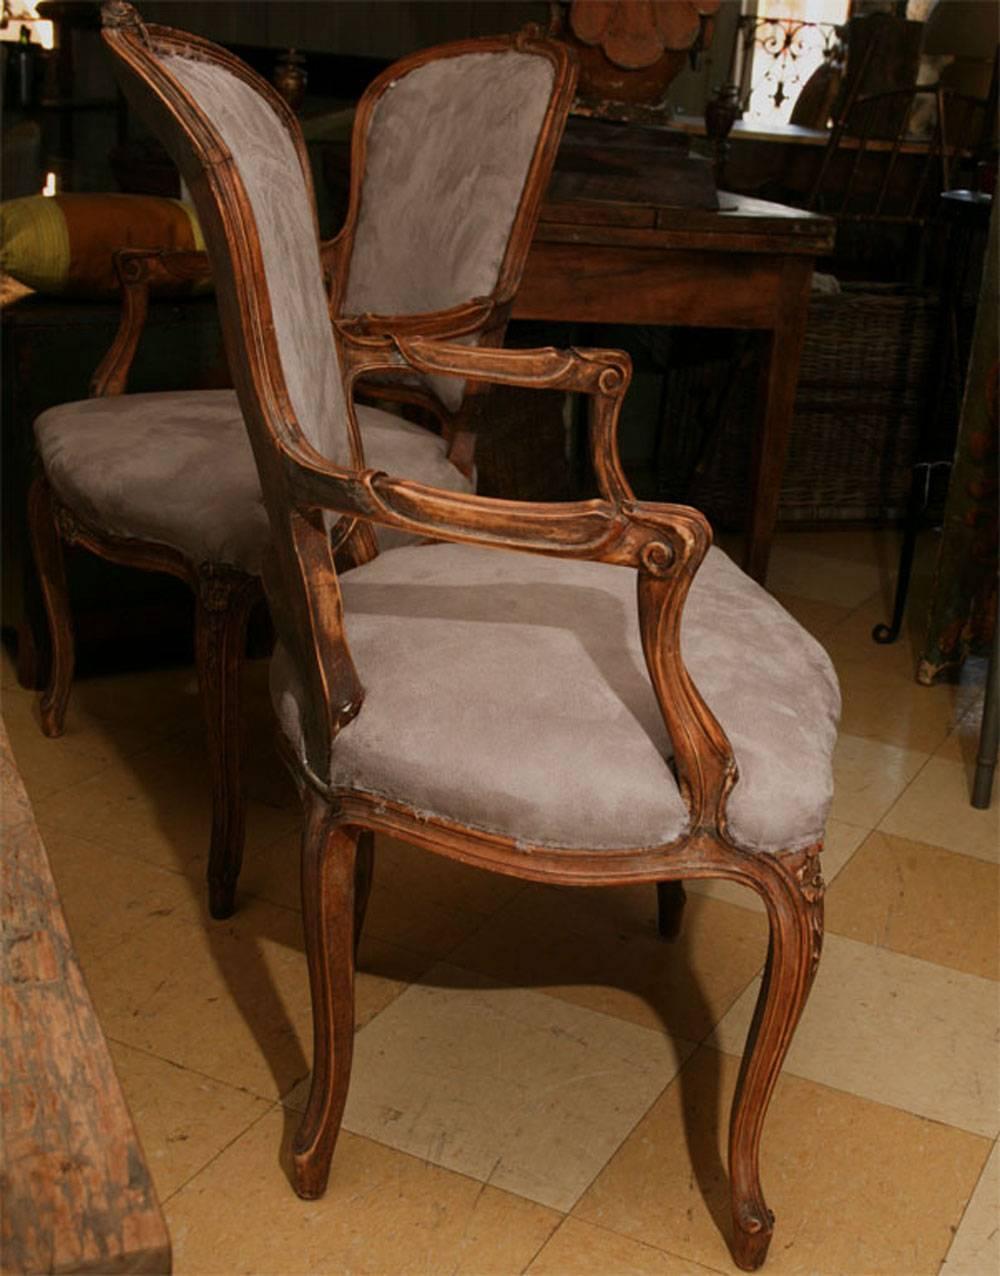 Pair of well-proportioned French armchairs, carved wood and covered in grey ultra-suede.
Measures:
 Arm height: 26